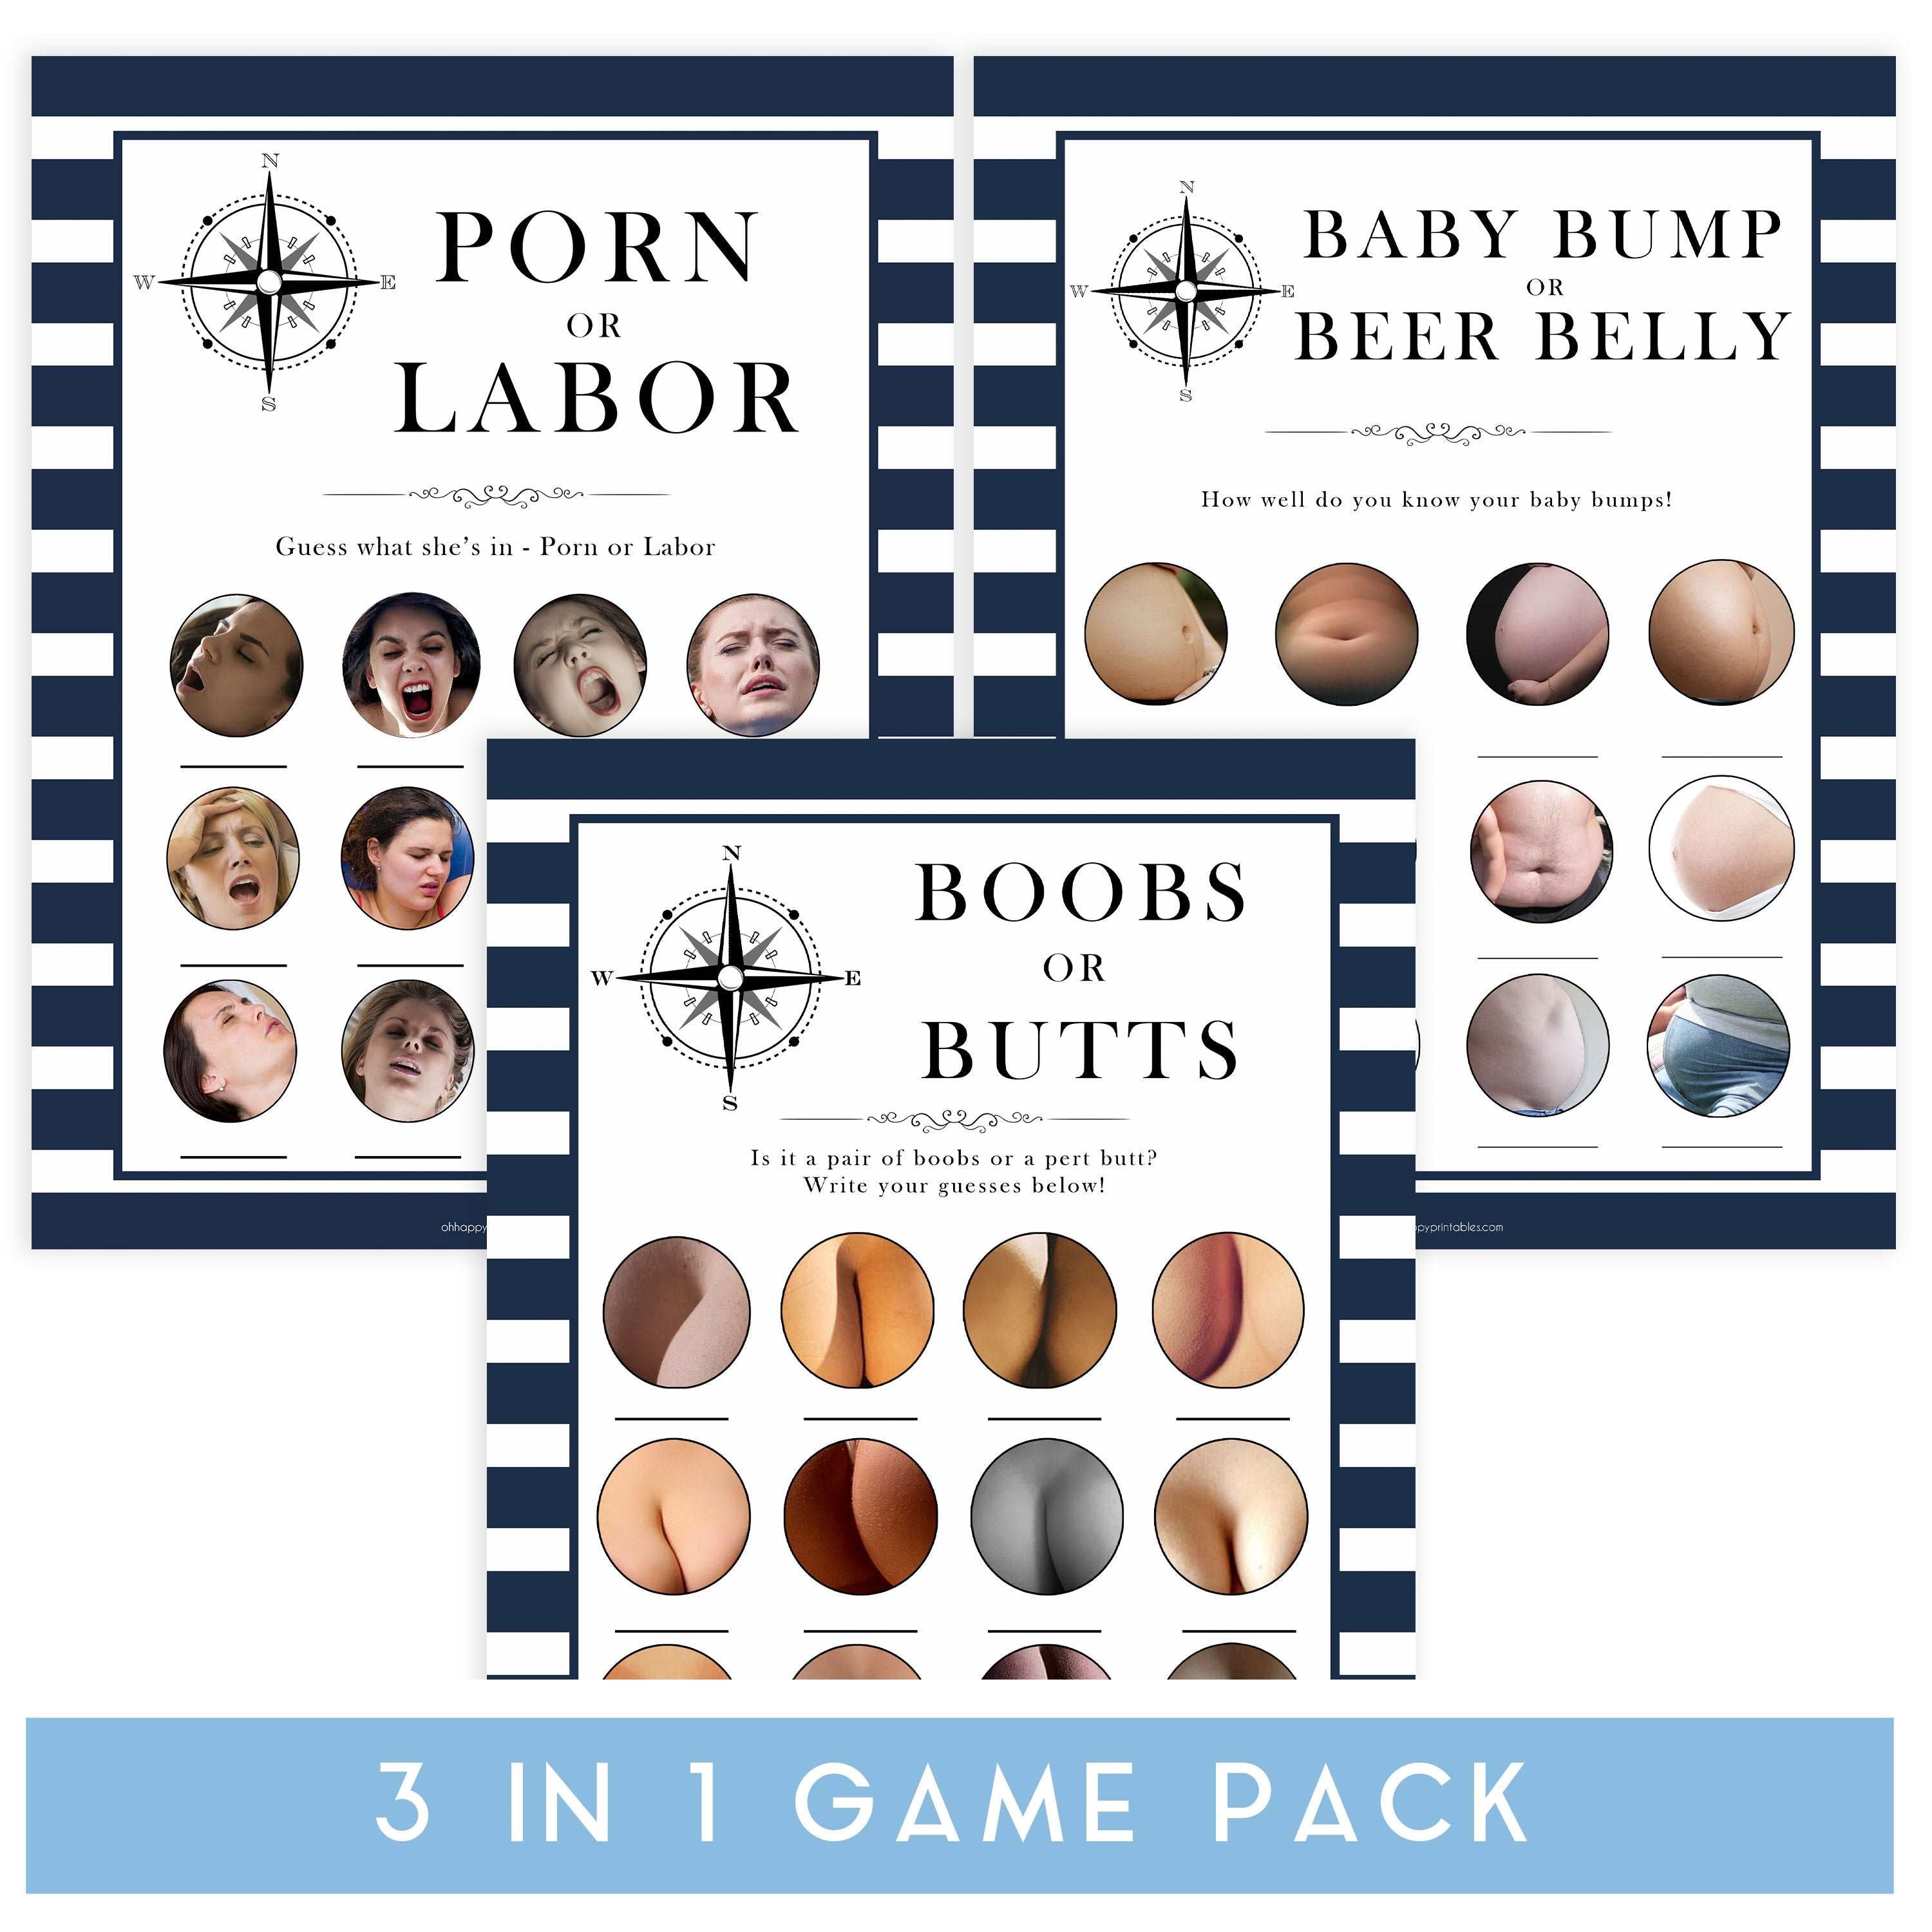 labor or porn, baby bump or beer belly, boobs or butts, Printable baby shower games, nautical baby shower games, nautical baby games, fun baby shower games, top baby shower ideas